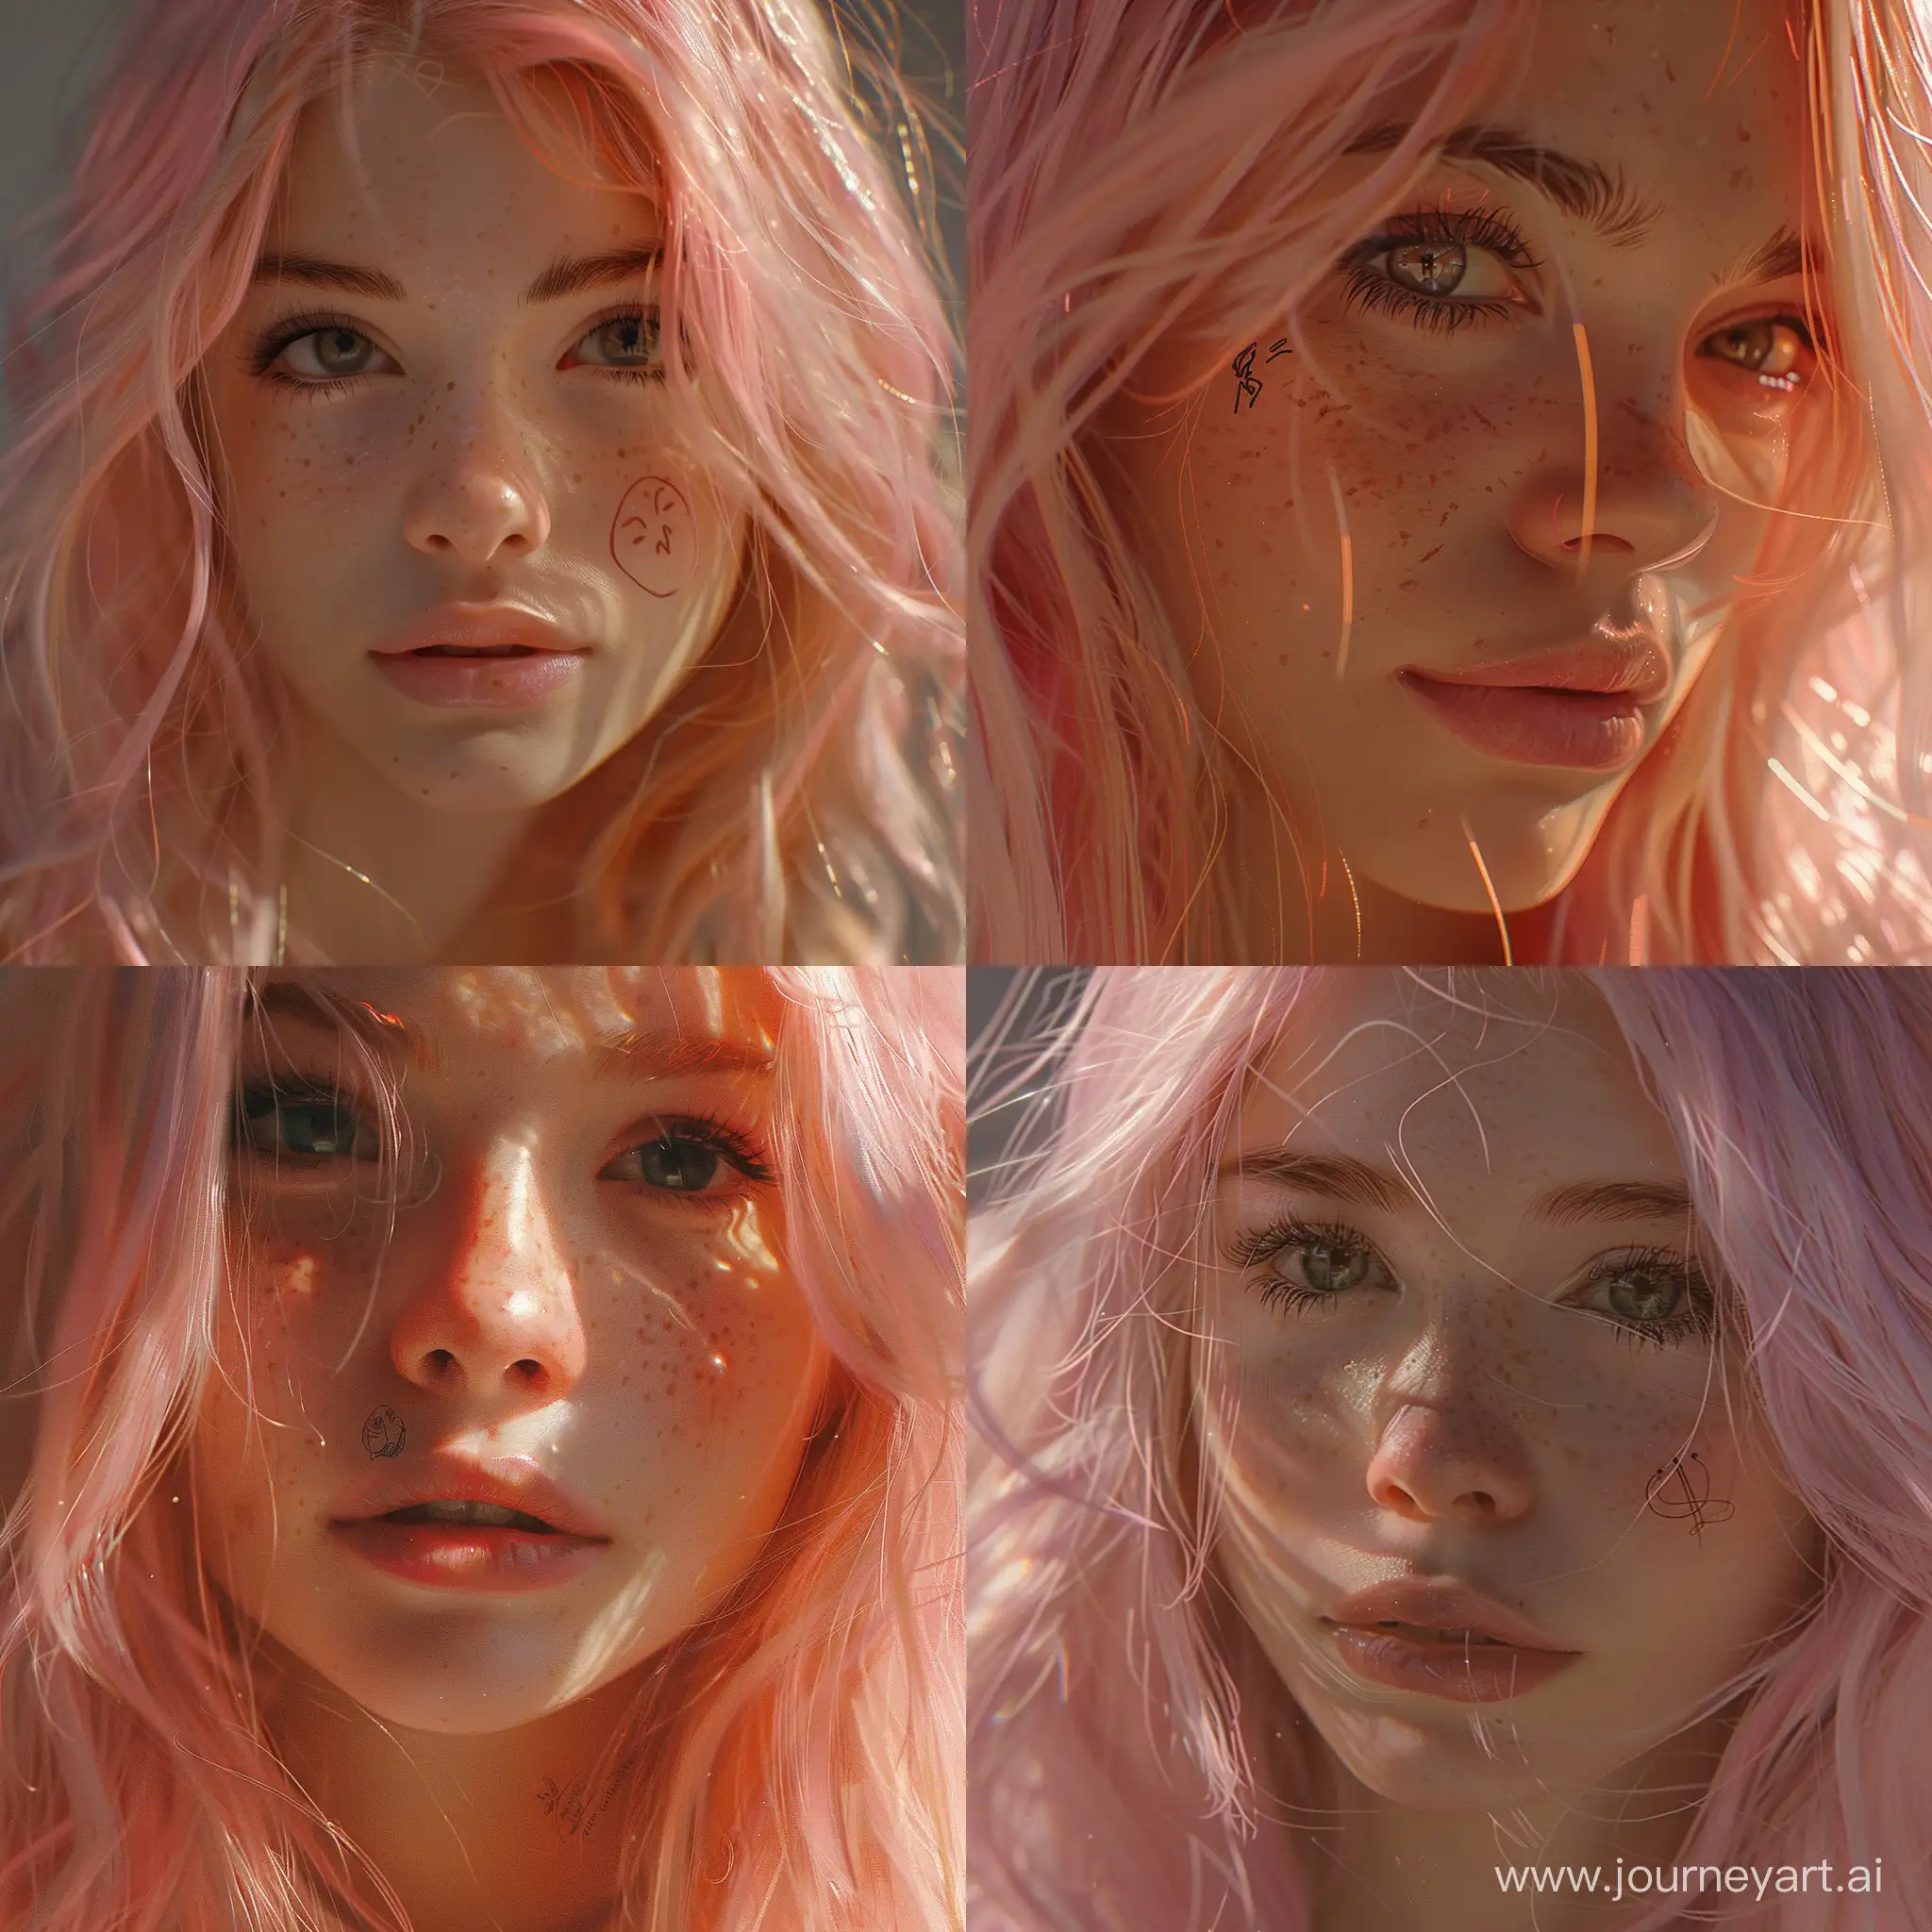 Radiant-17YearOld-Girl-with-Soft-Pink-Hair-and-Freckles